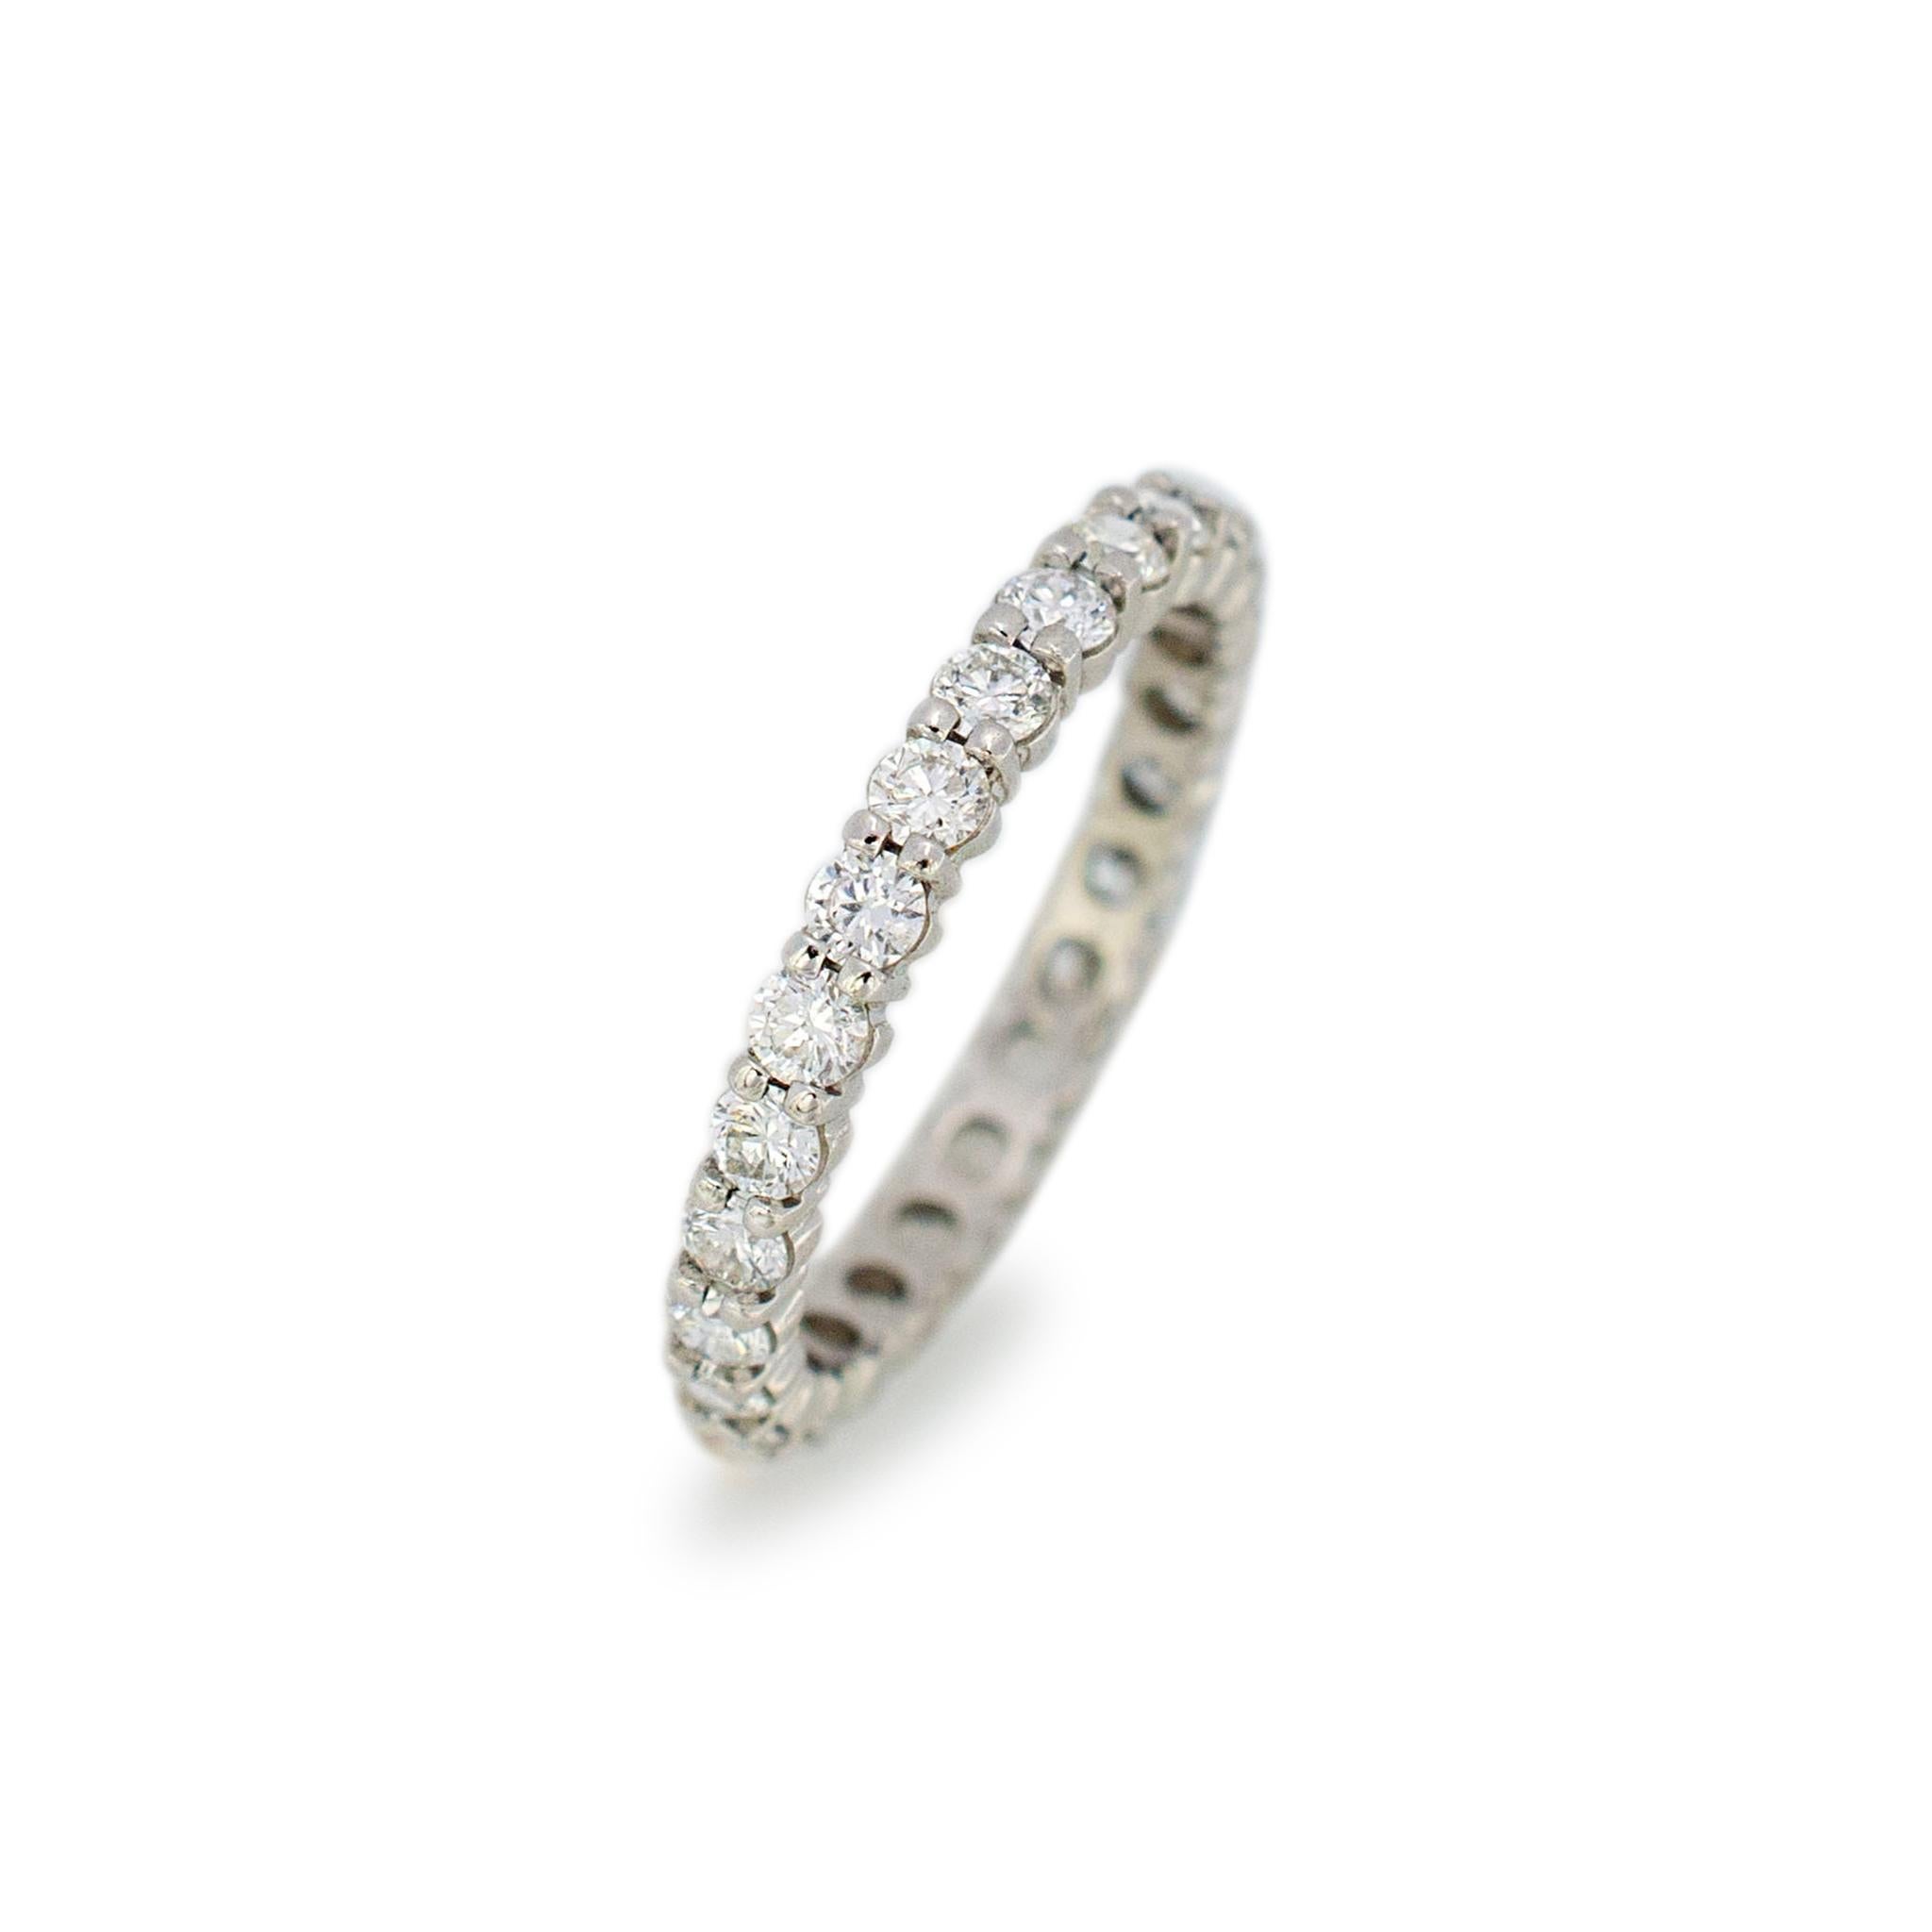 Gender: Ladies

Metal Type: Platinum 

Size: 5

Shank Maximum Width: 2.50 mm

Weight: 2.12 grams

Ladies platinum diamond eternity band with a half-round shank.

Pre-owned in excellent condition. Might shows minor signs of wear.

Shared-Prong Set in